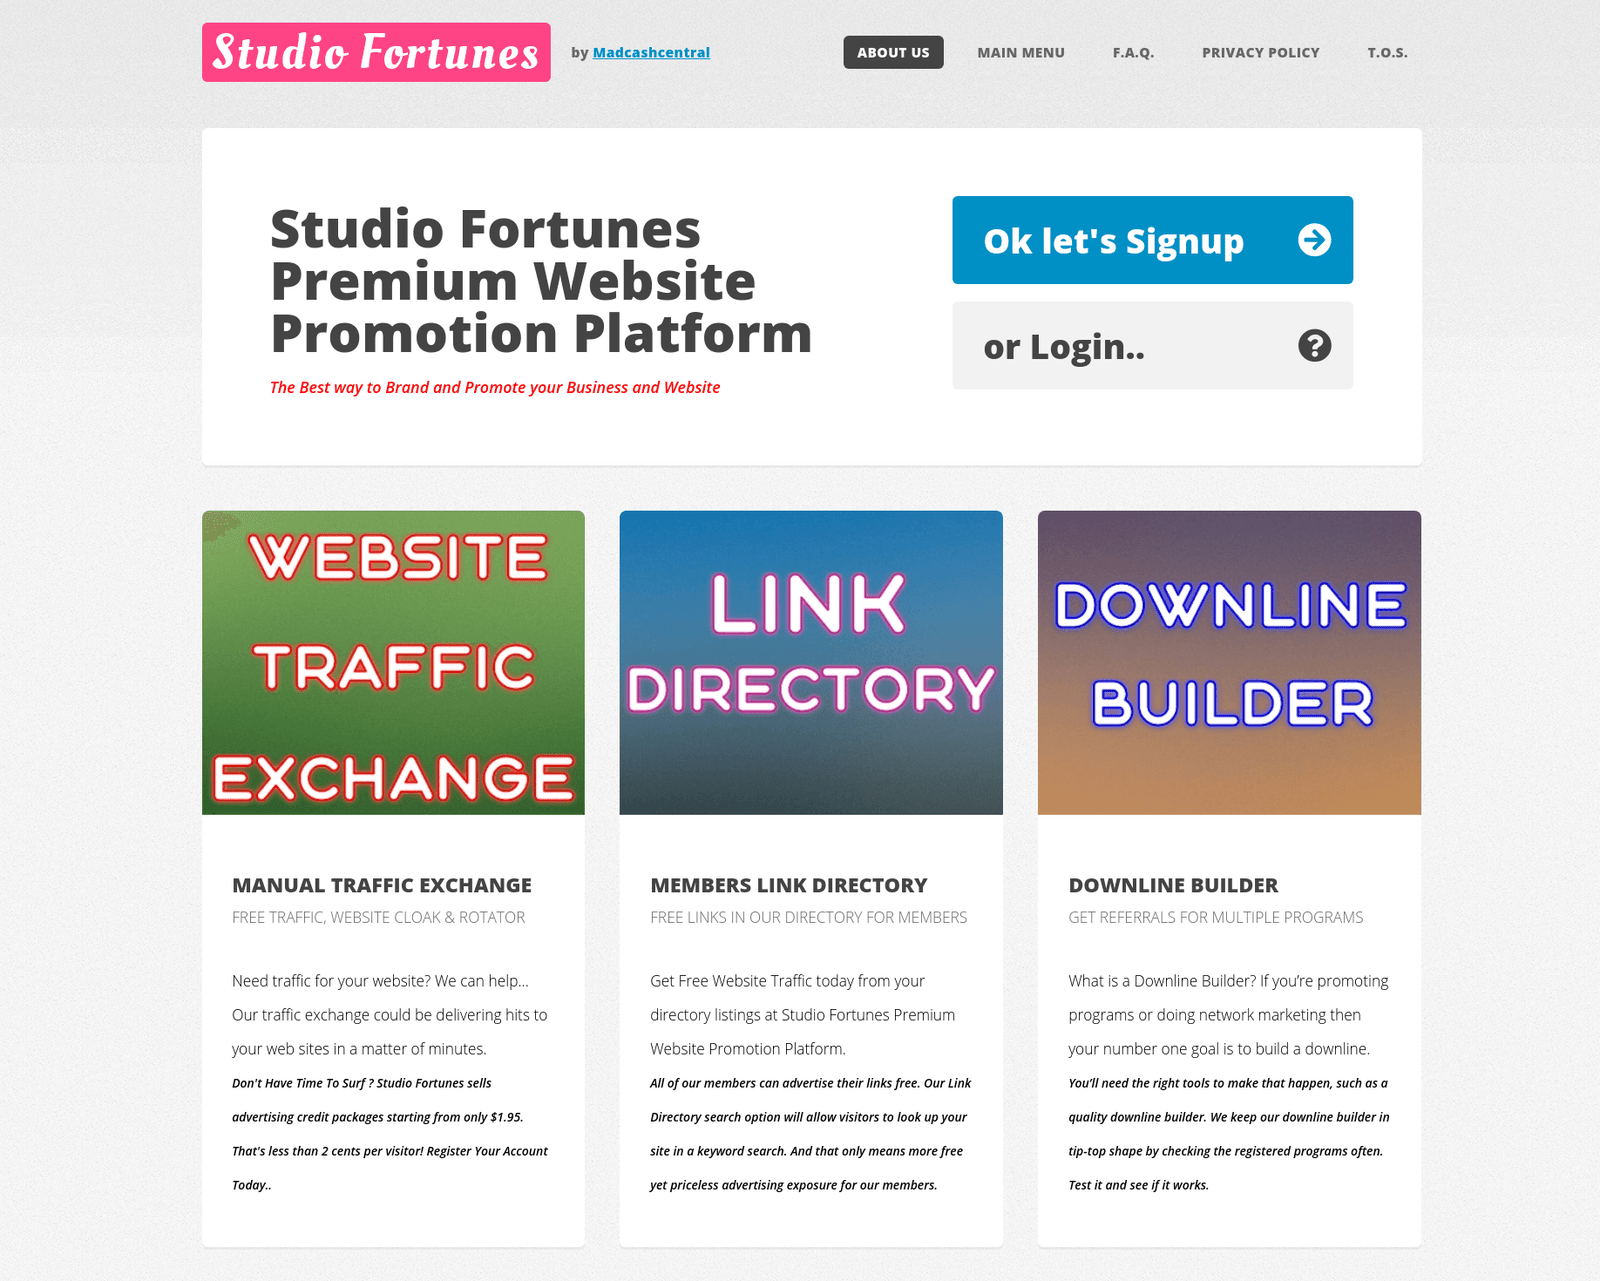 Studio Fortunes Traffic Exchange + Linkdirectory + DownLine builder. The Best way to Brand and Promote your Business and Website.